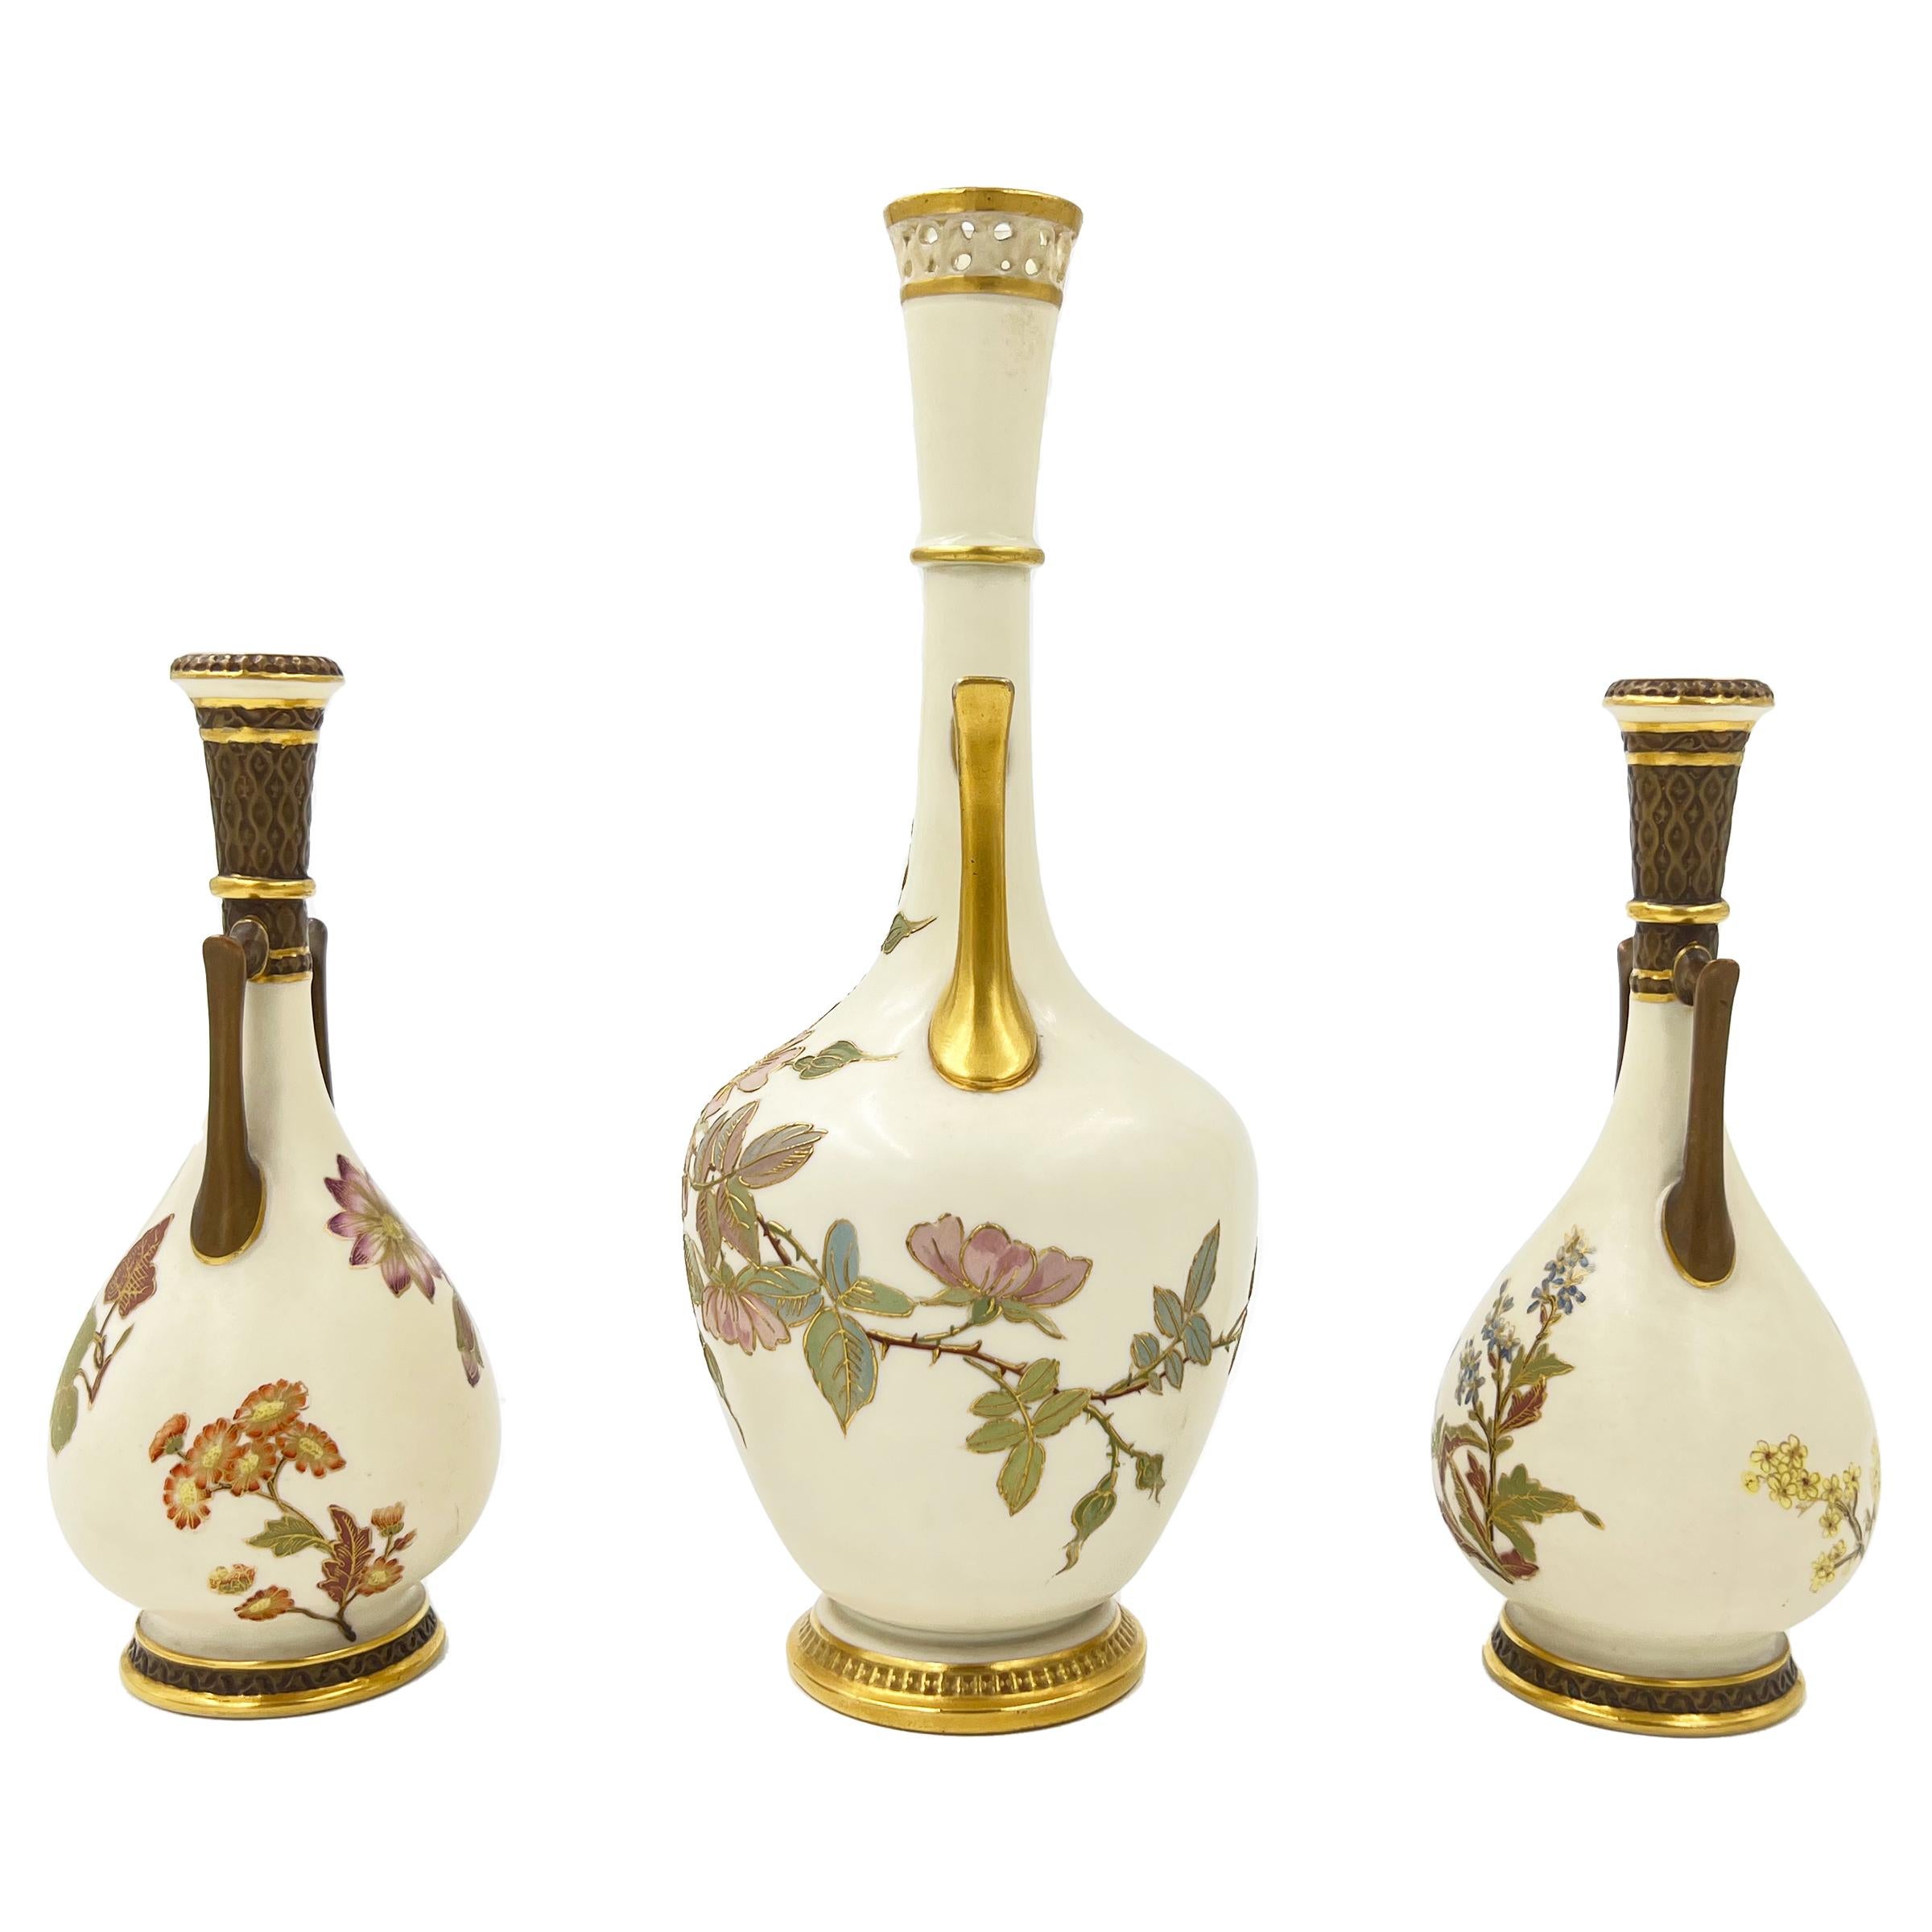 The ovoid body on each vase decorated with gilded floral design, the ovoid body attached to a long neck with two side handles, raised on circular gilded bases, stamped on the base of each vase. 

Dimensions: large vase: 25cm, diameters: